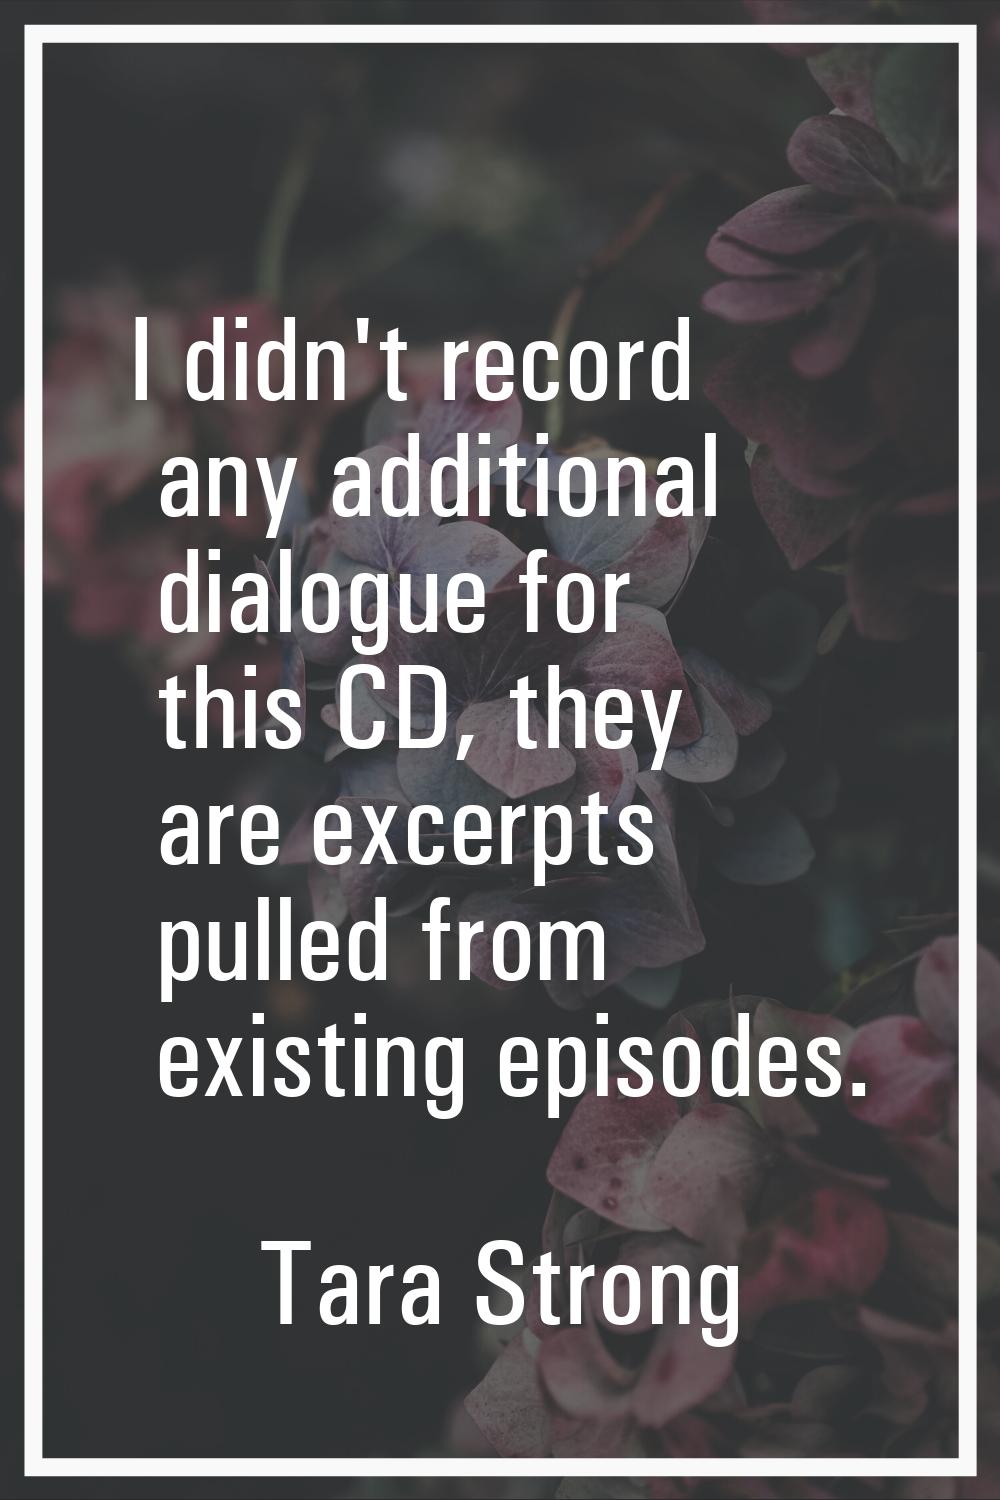 I didn't record any additional dialogue for this CD, they are excerpts pulled from existing episode